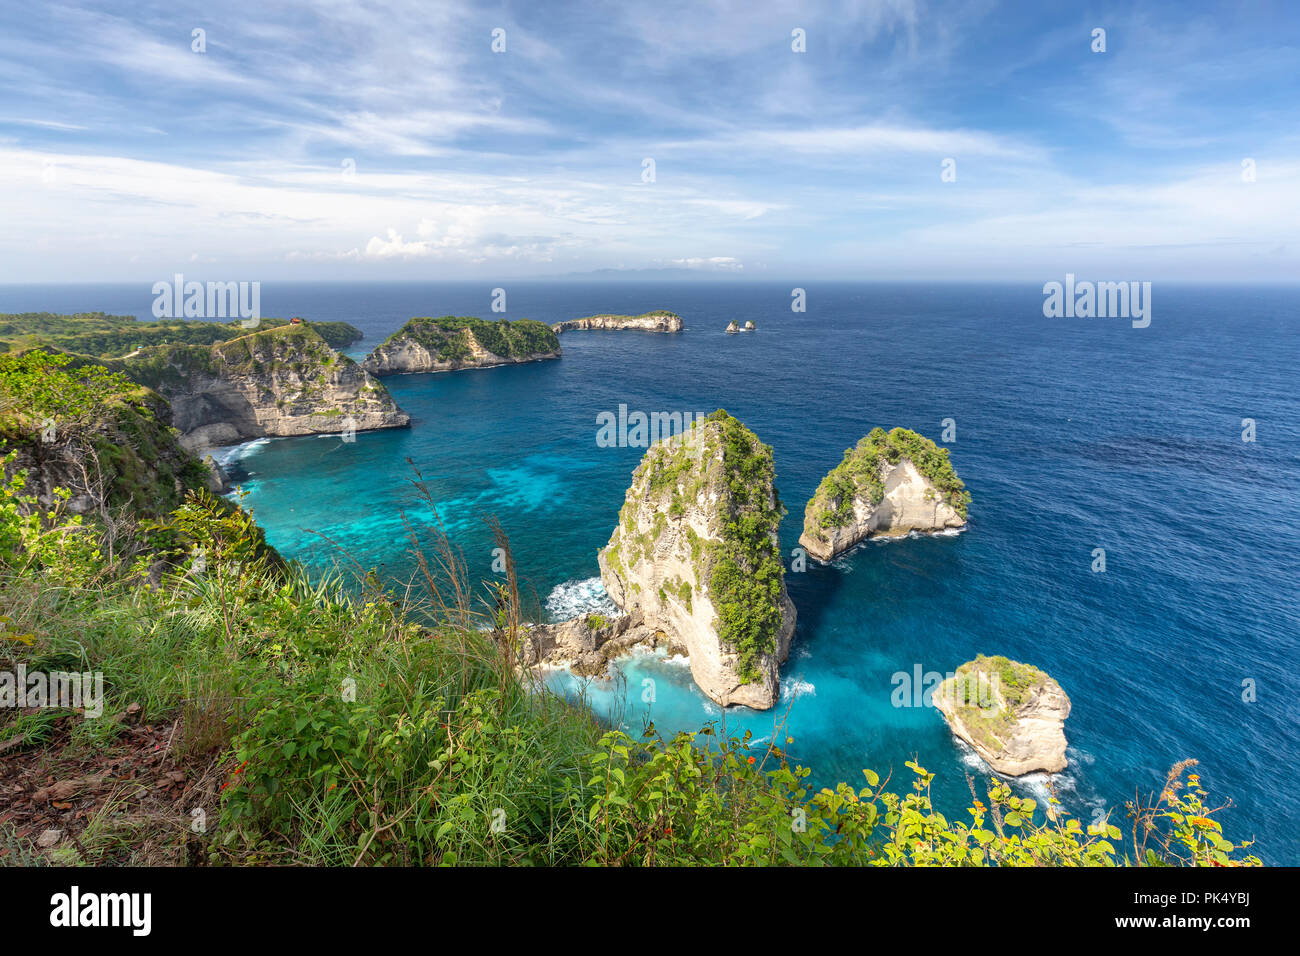 Raja Lima islands which include world class diving reefs on Nusa Penida, Indonesia. Stock Photo